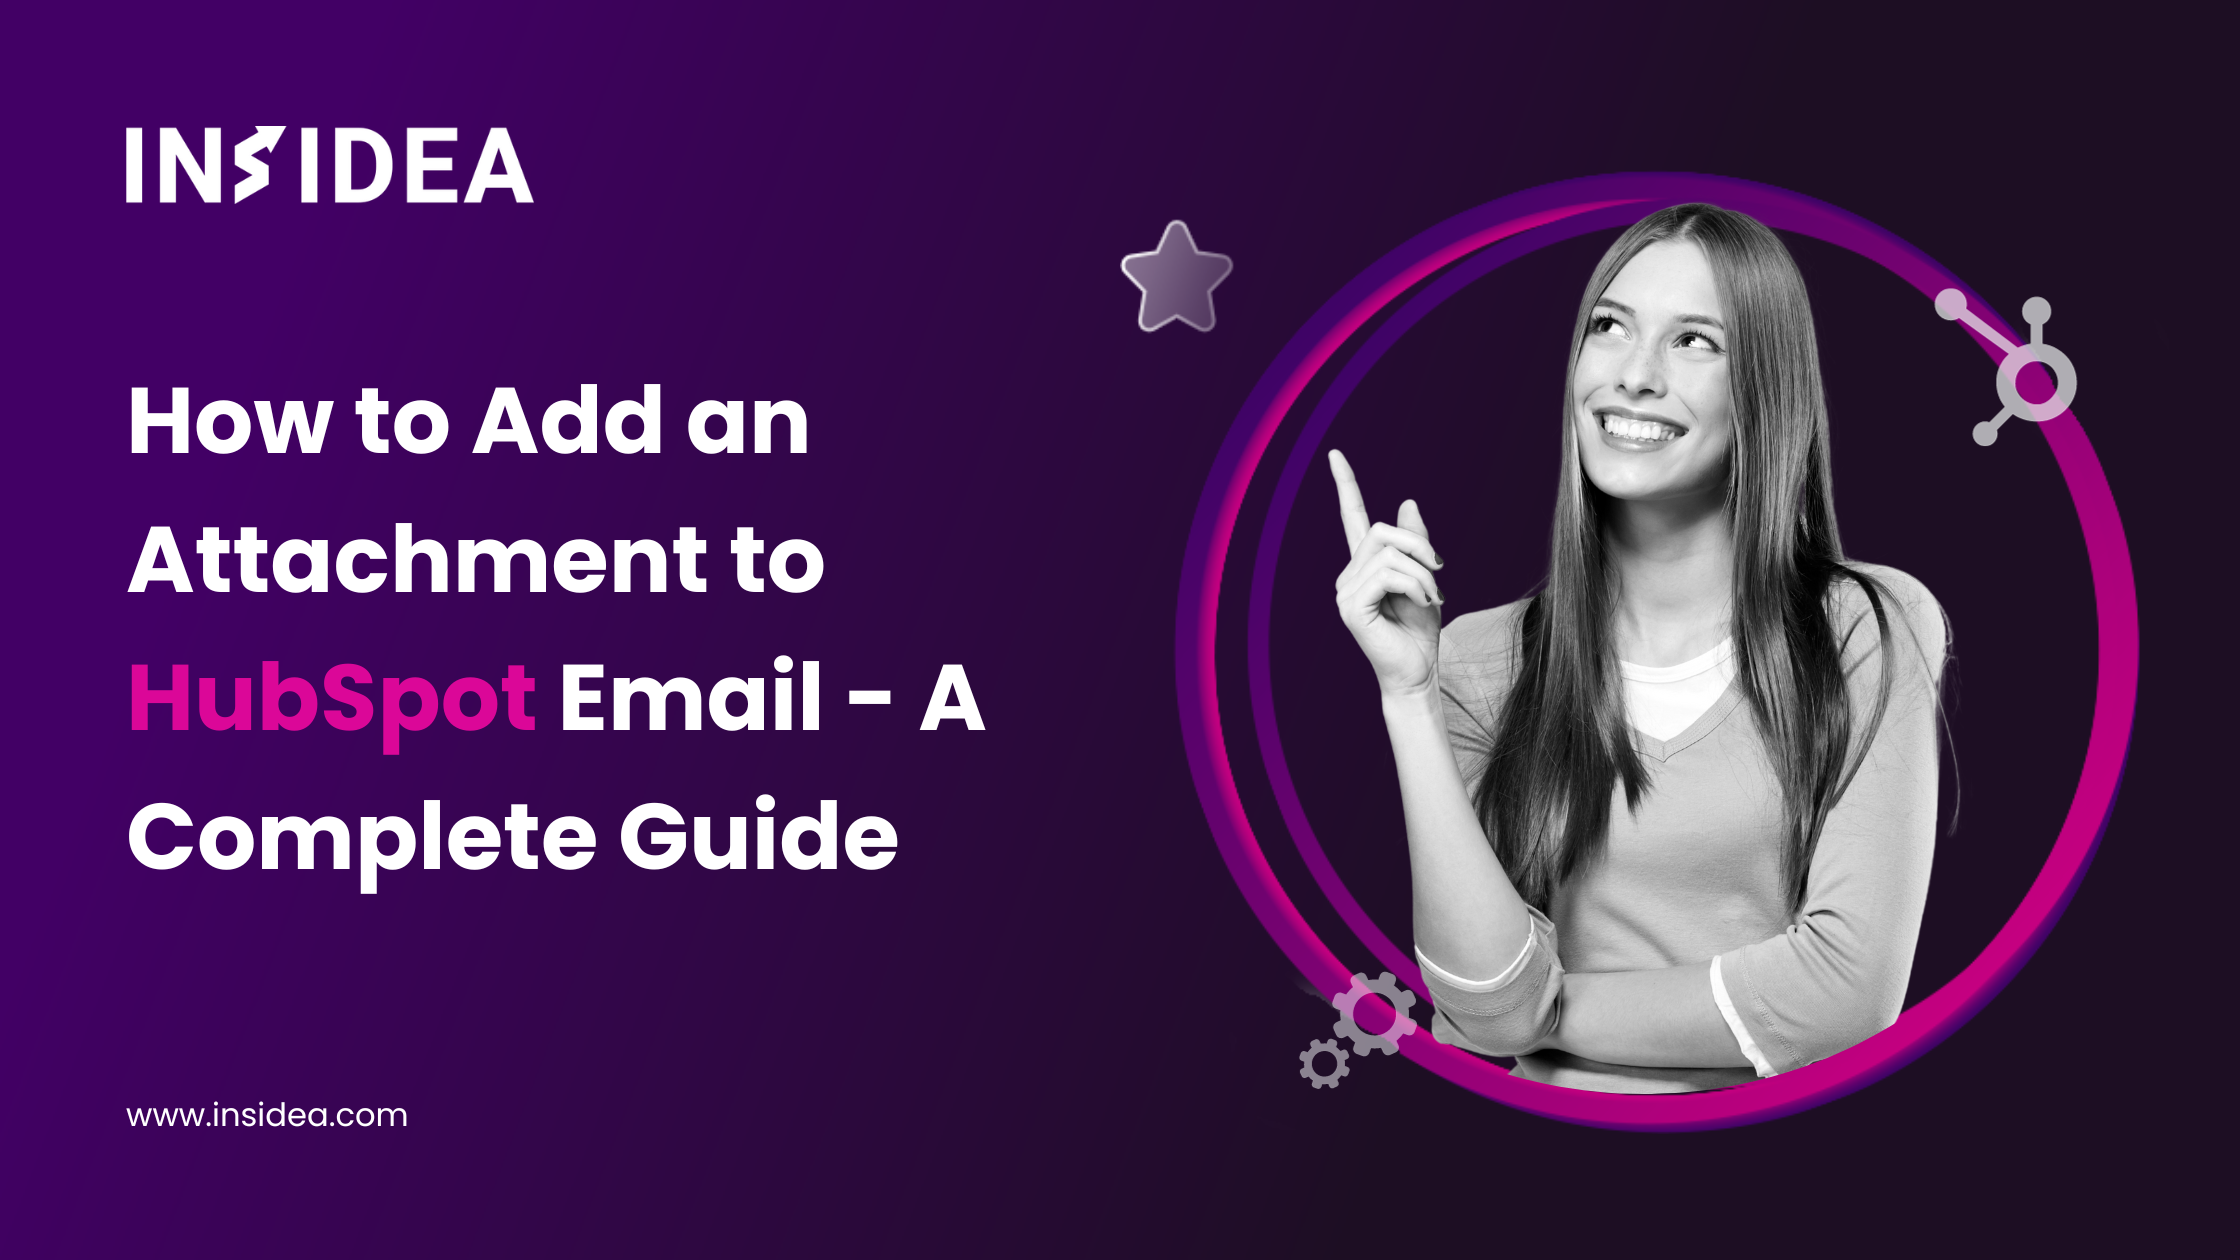 How to Add an Attachment to HubSpot Email - A Complete Guide